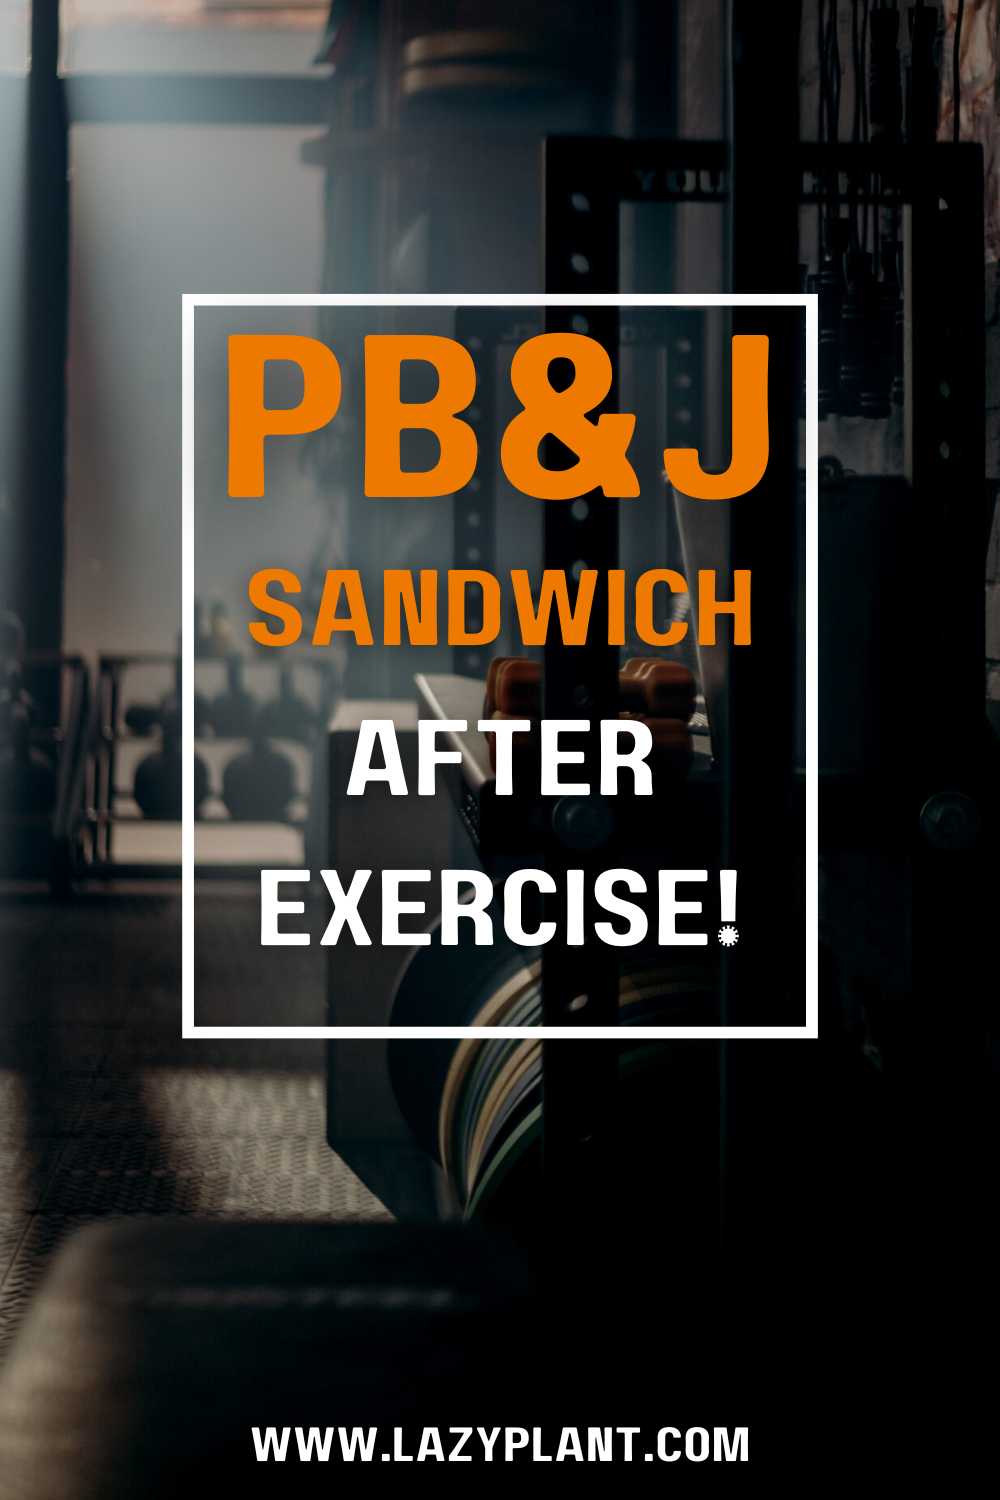 What makes a PB&J sandwich the perfect snack after exercise?